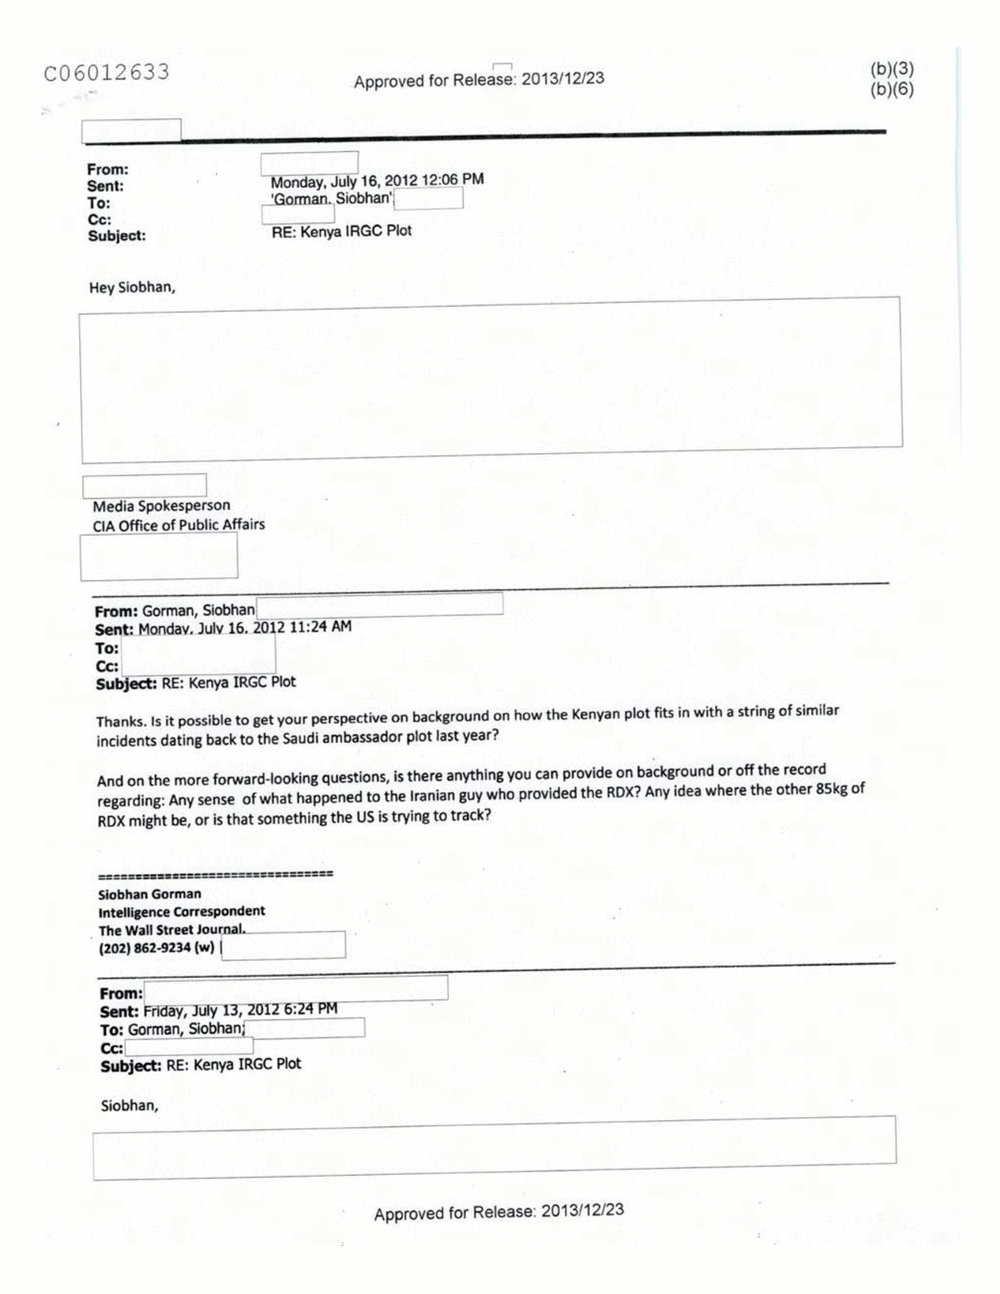 Page 192 from Email Correspondence Between Reporters and CIA Flacks